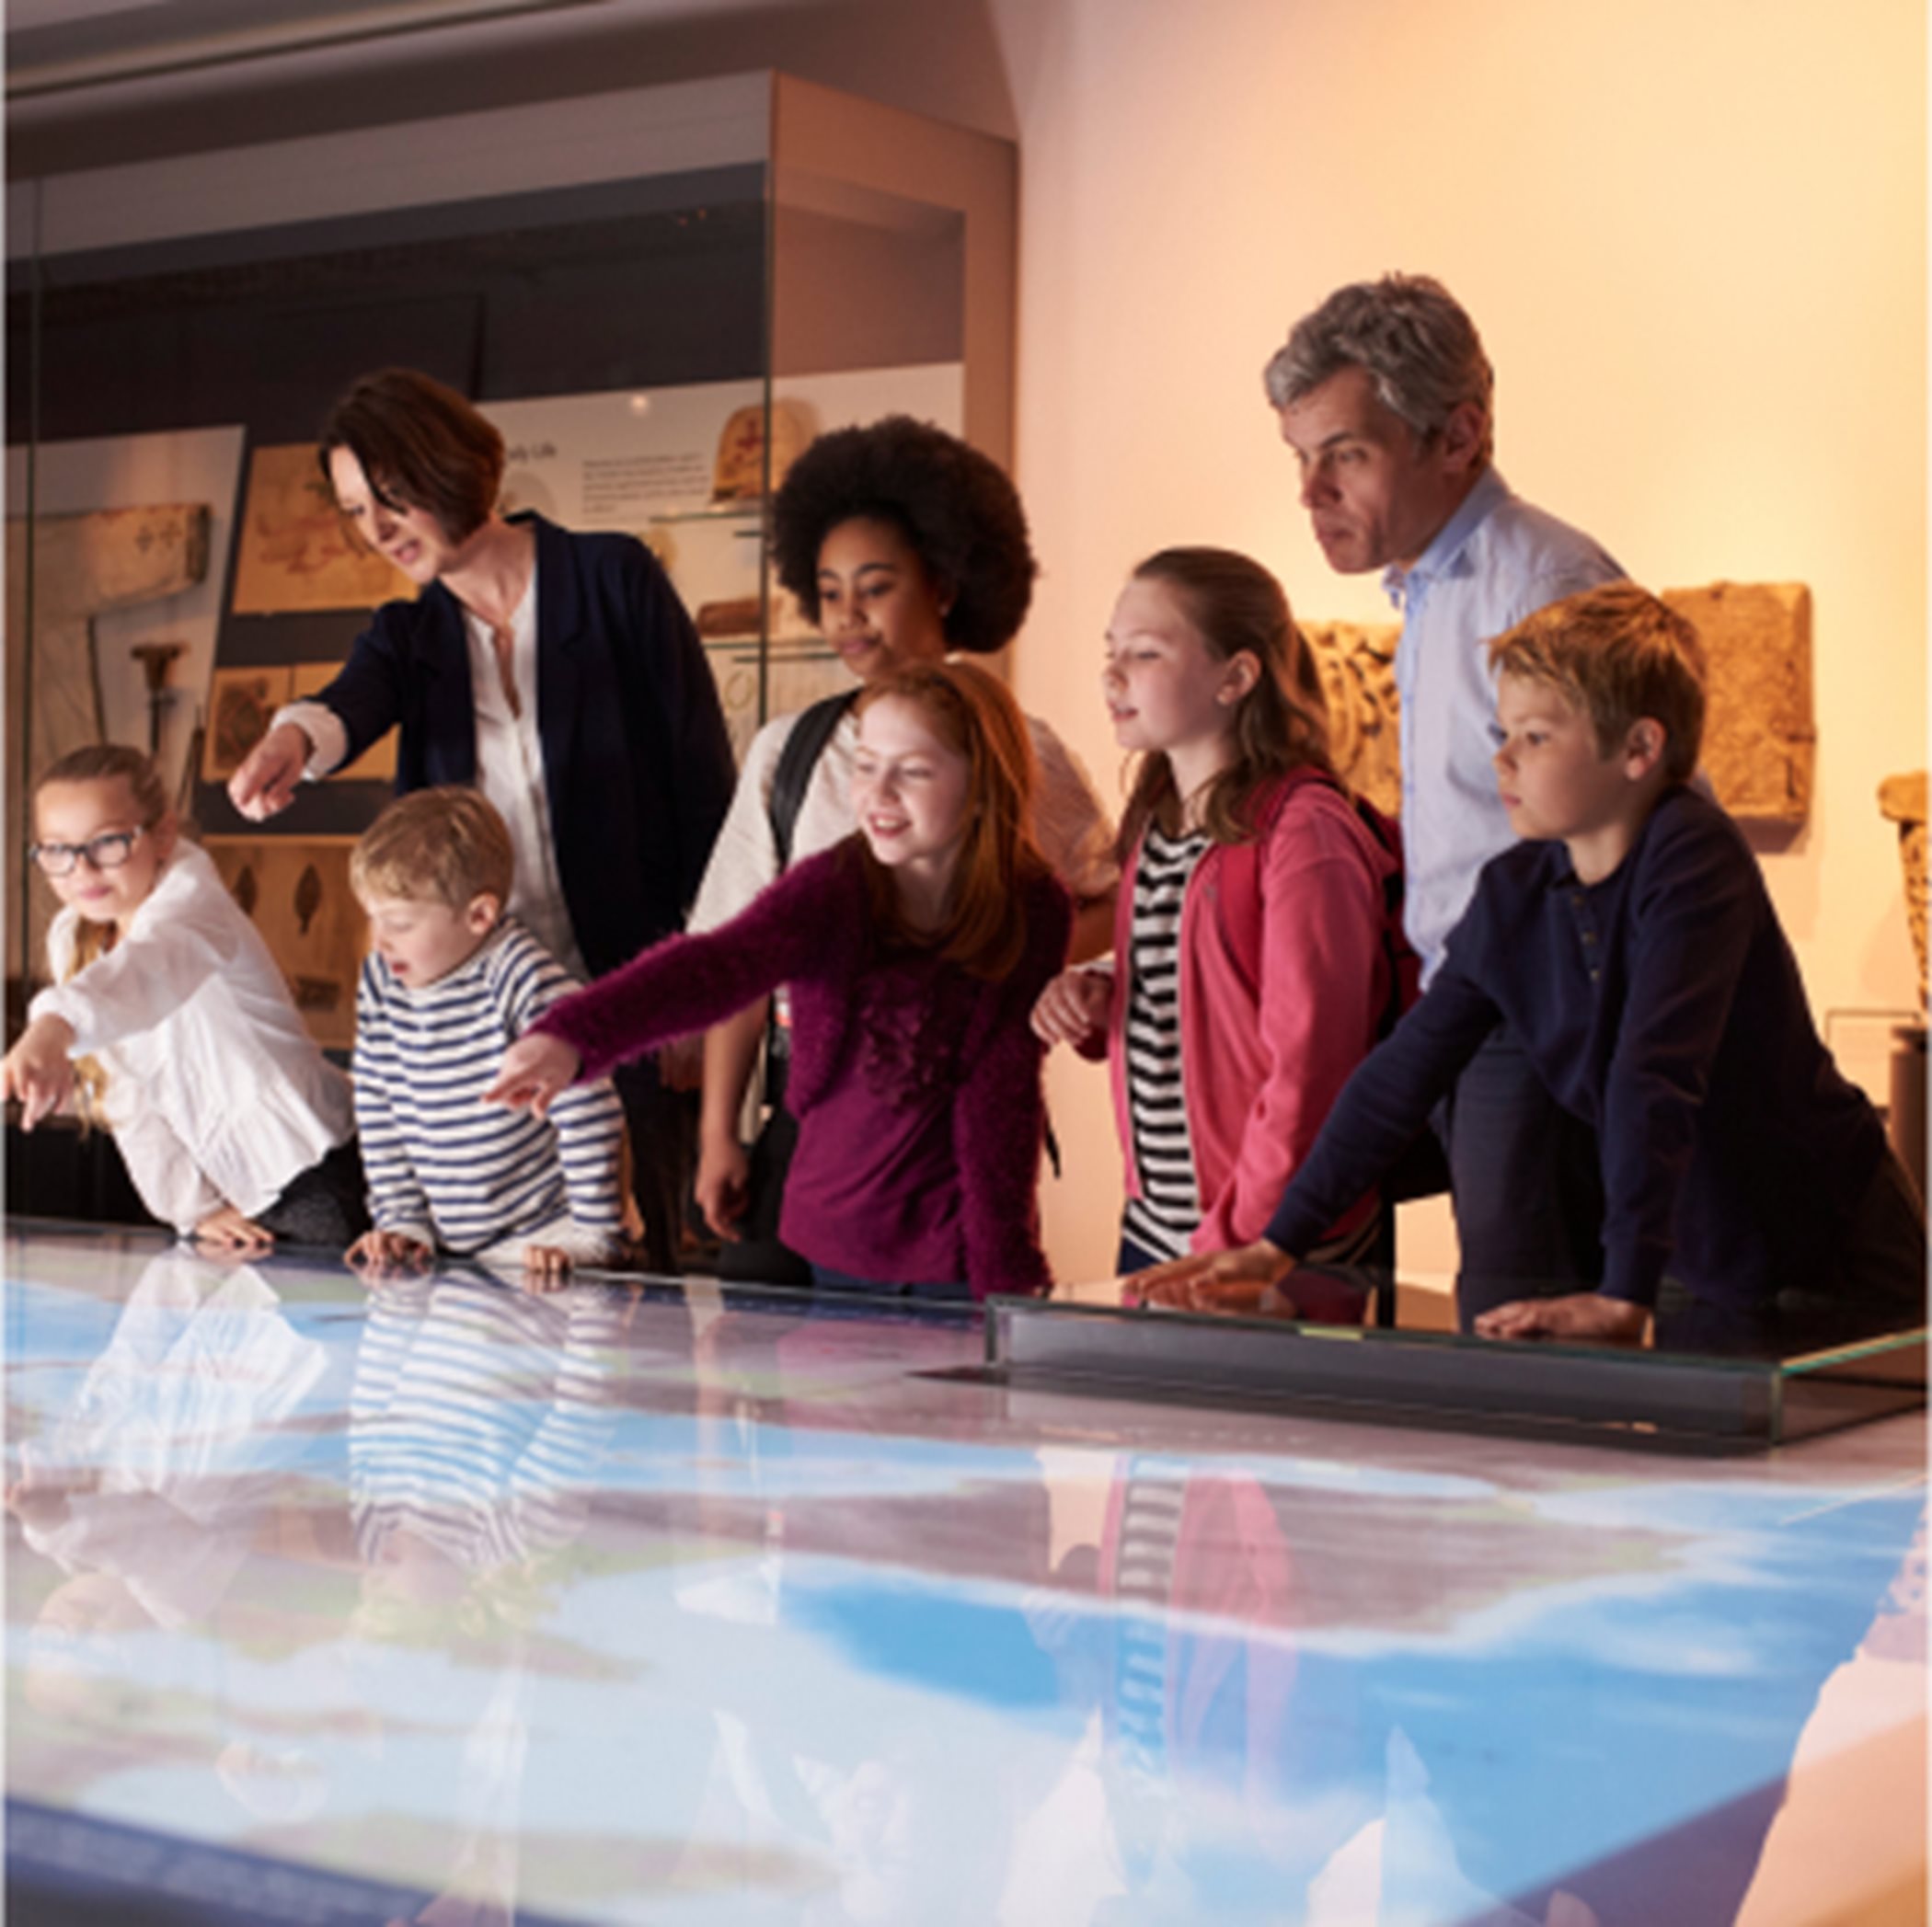 Families interacting with a museum display